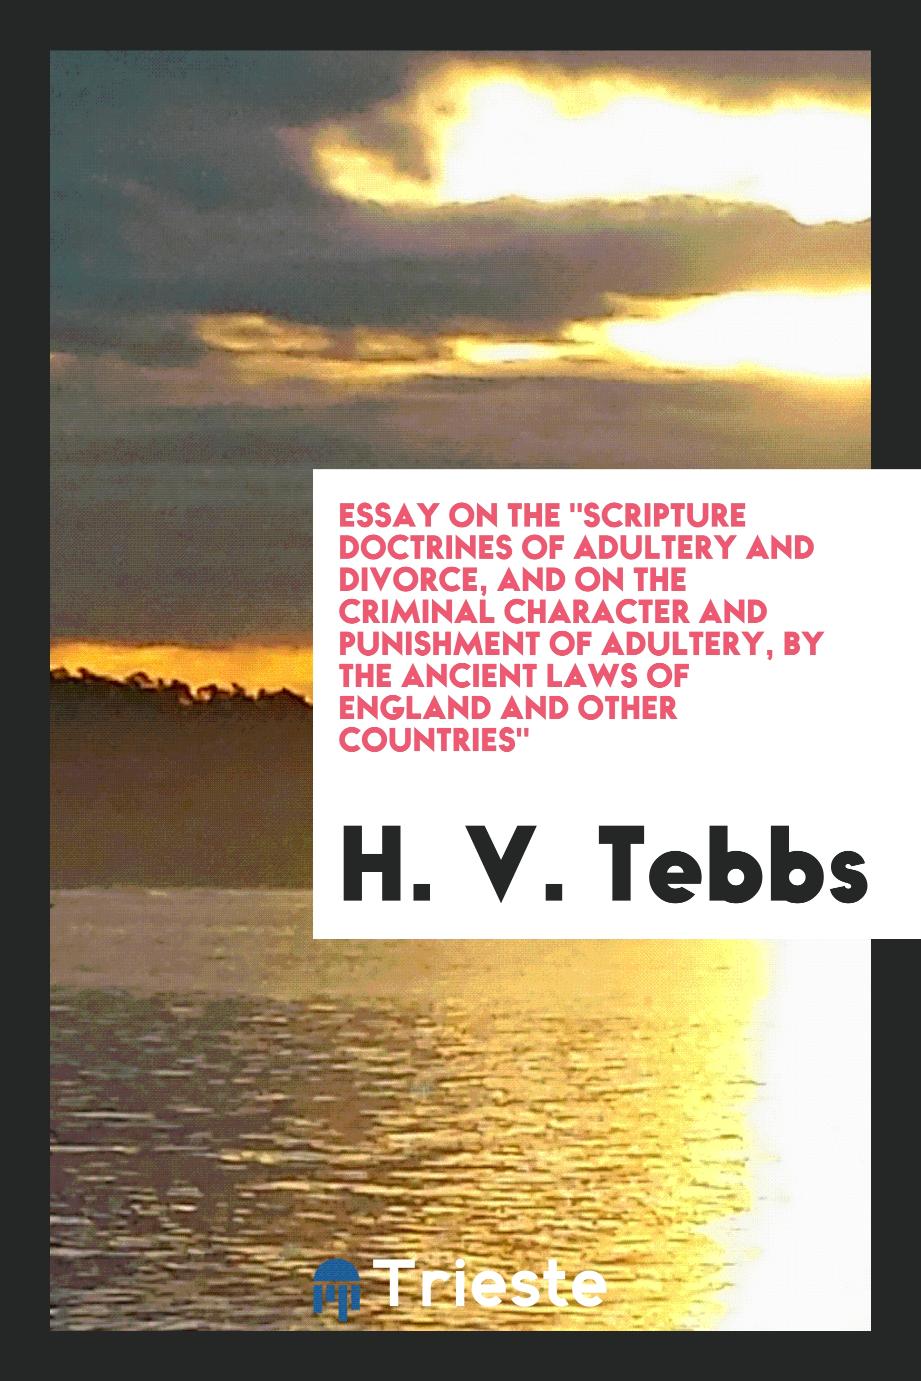 Essay on the "Scripture Doctrines of Adultery and Divorce, and on the Criminal Character and Punishment of Adultery, by the Ancient Laws of England and Other Countries"